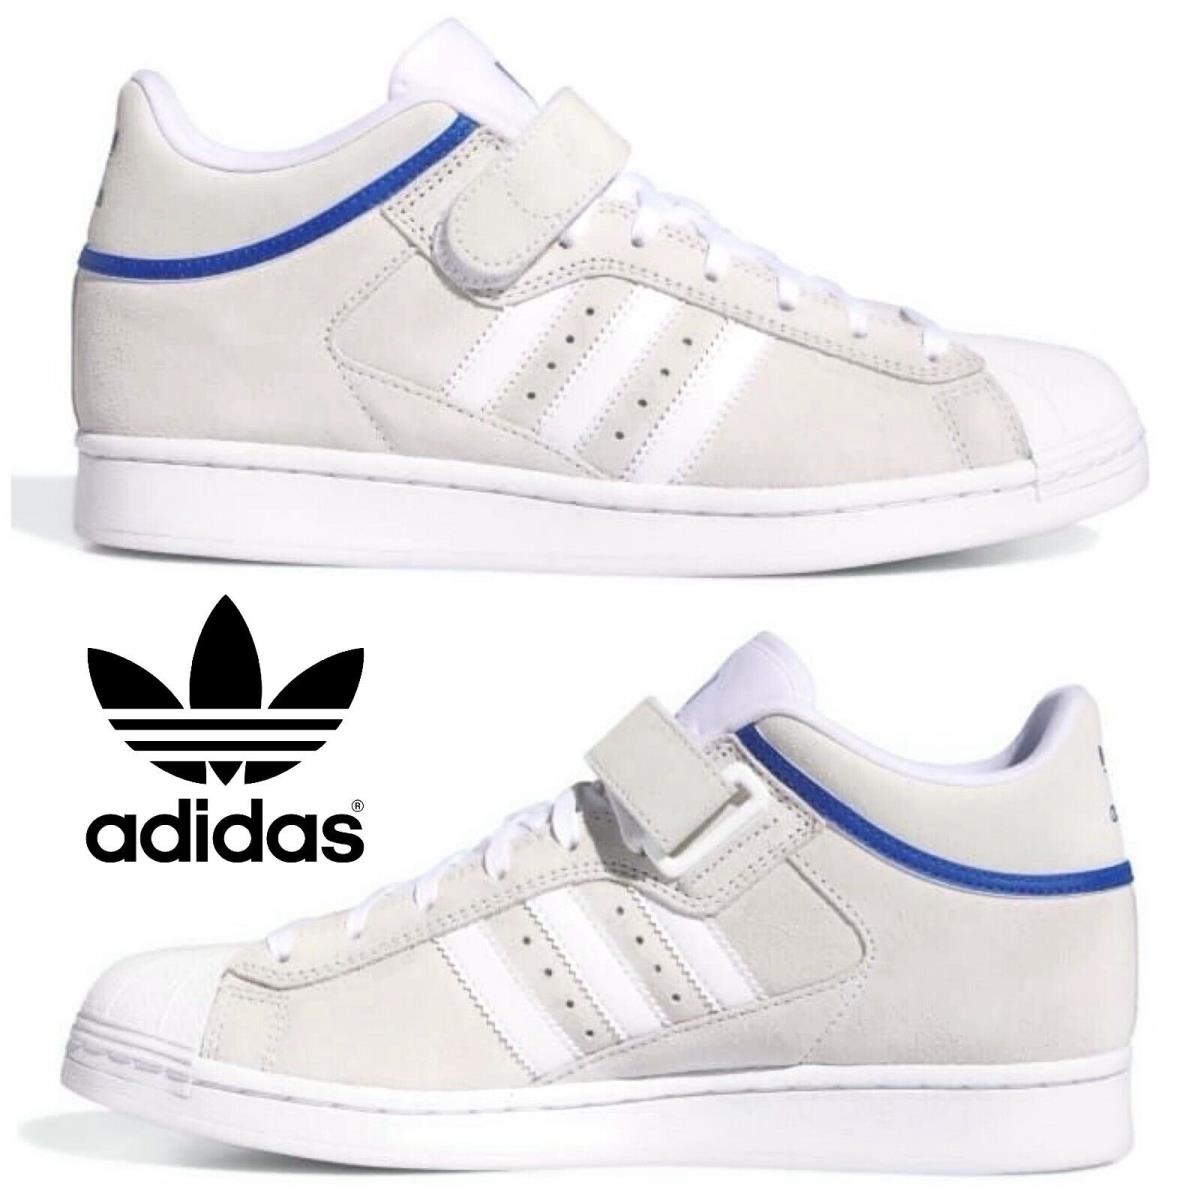 Adidas Pro Shell Adv Mens Sneakers Comfort Casual Shoes Skateboarding Basketball